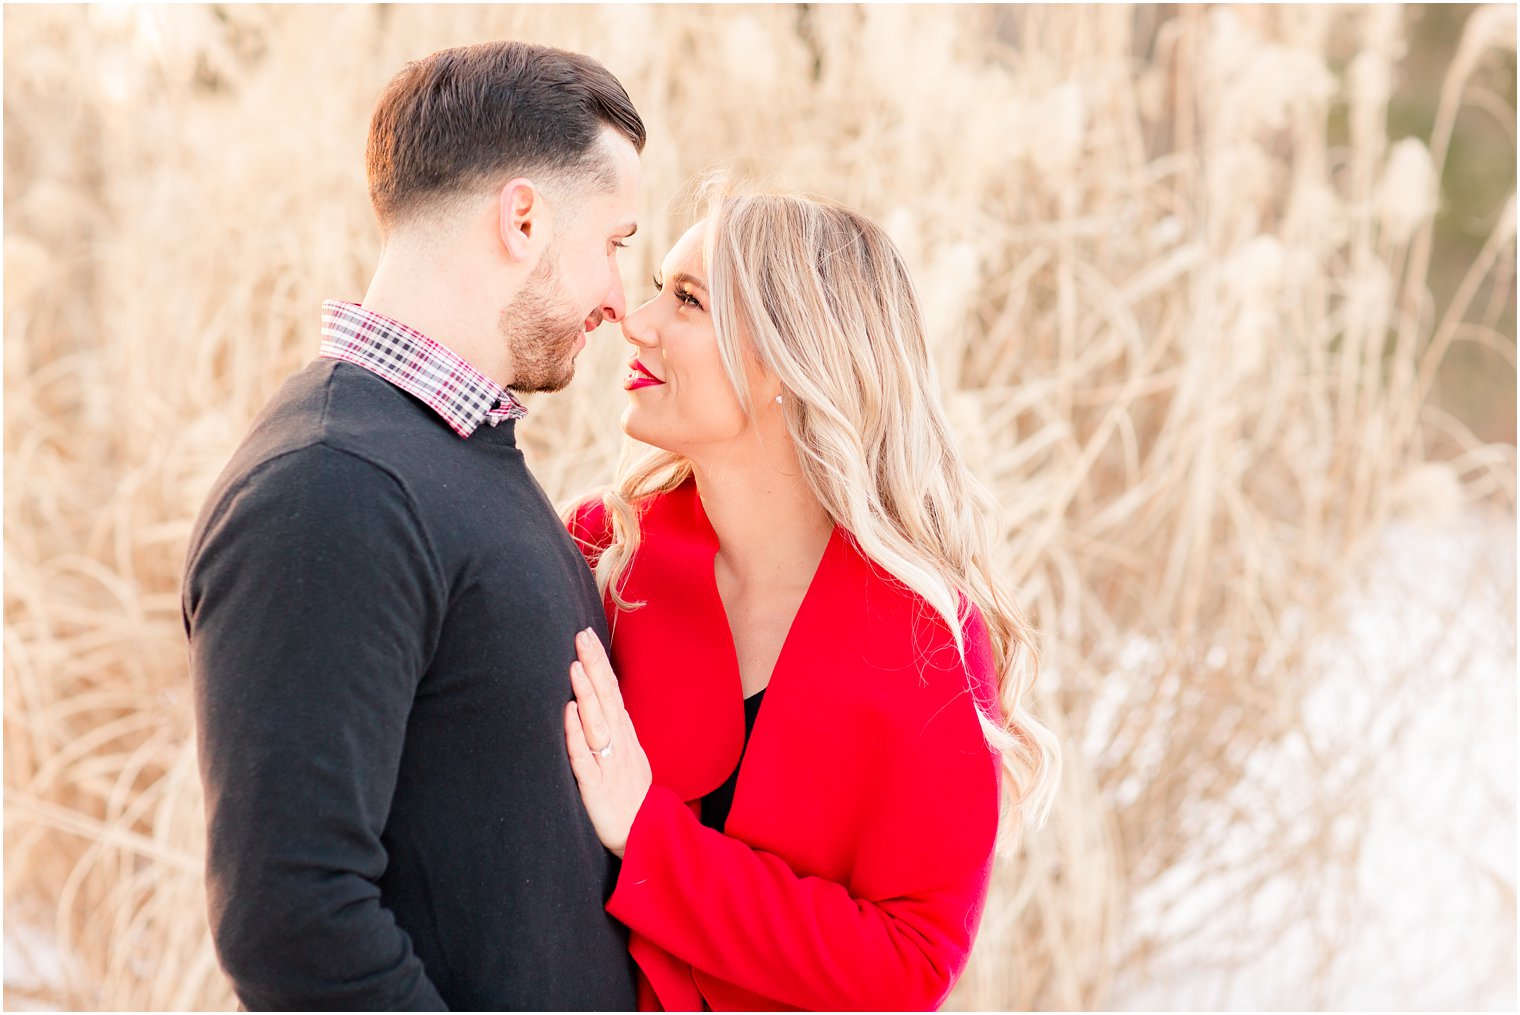 Romantic engagement photo with tall grasses